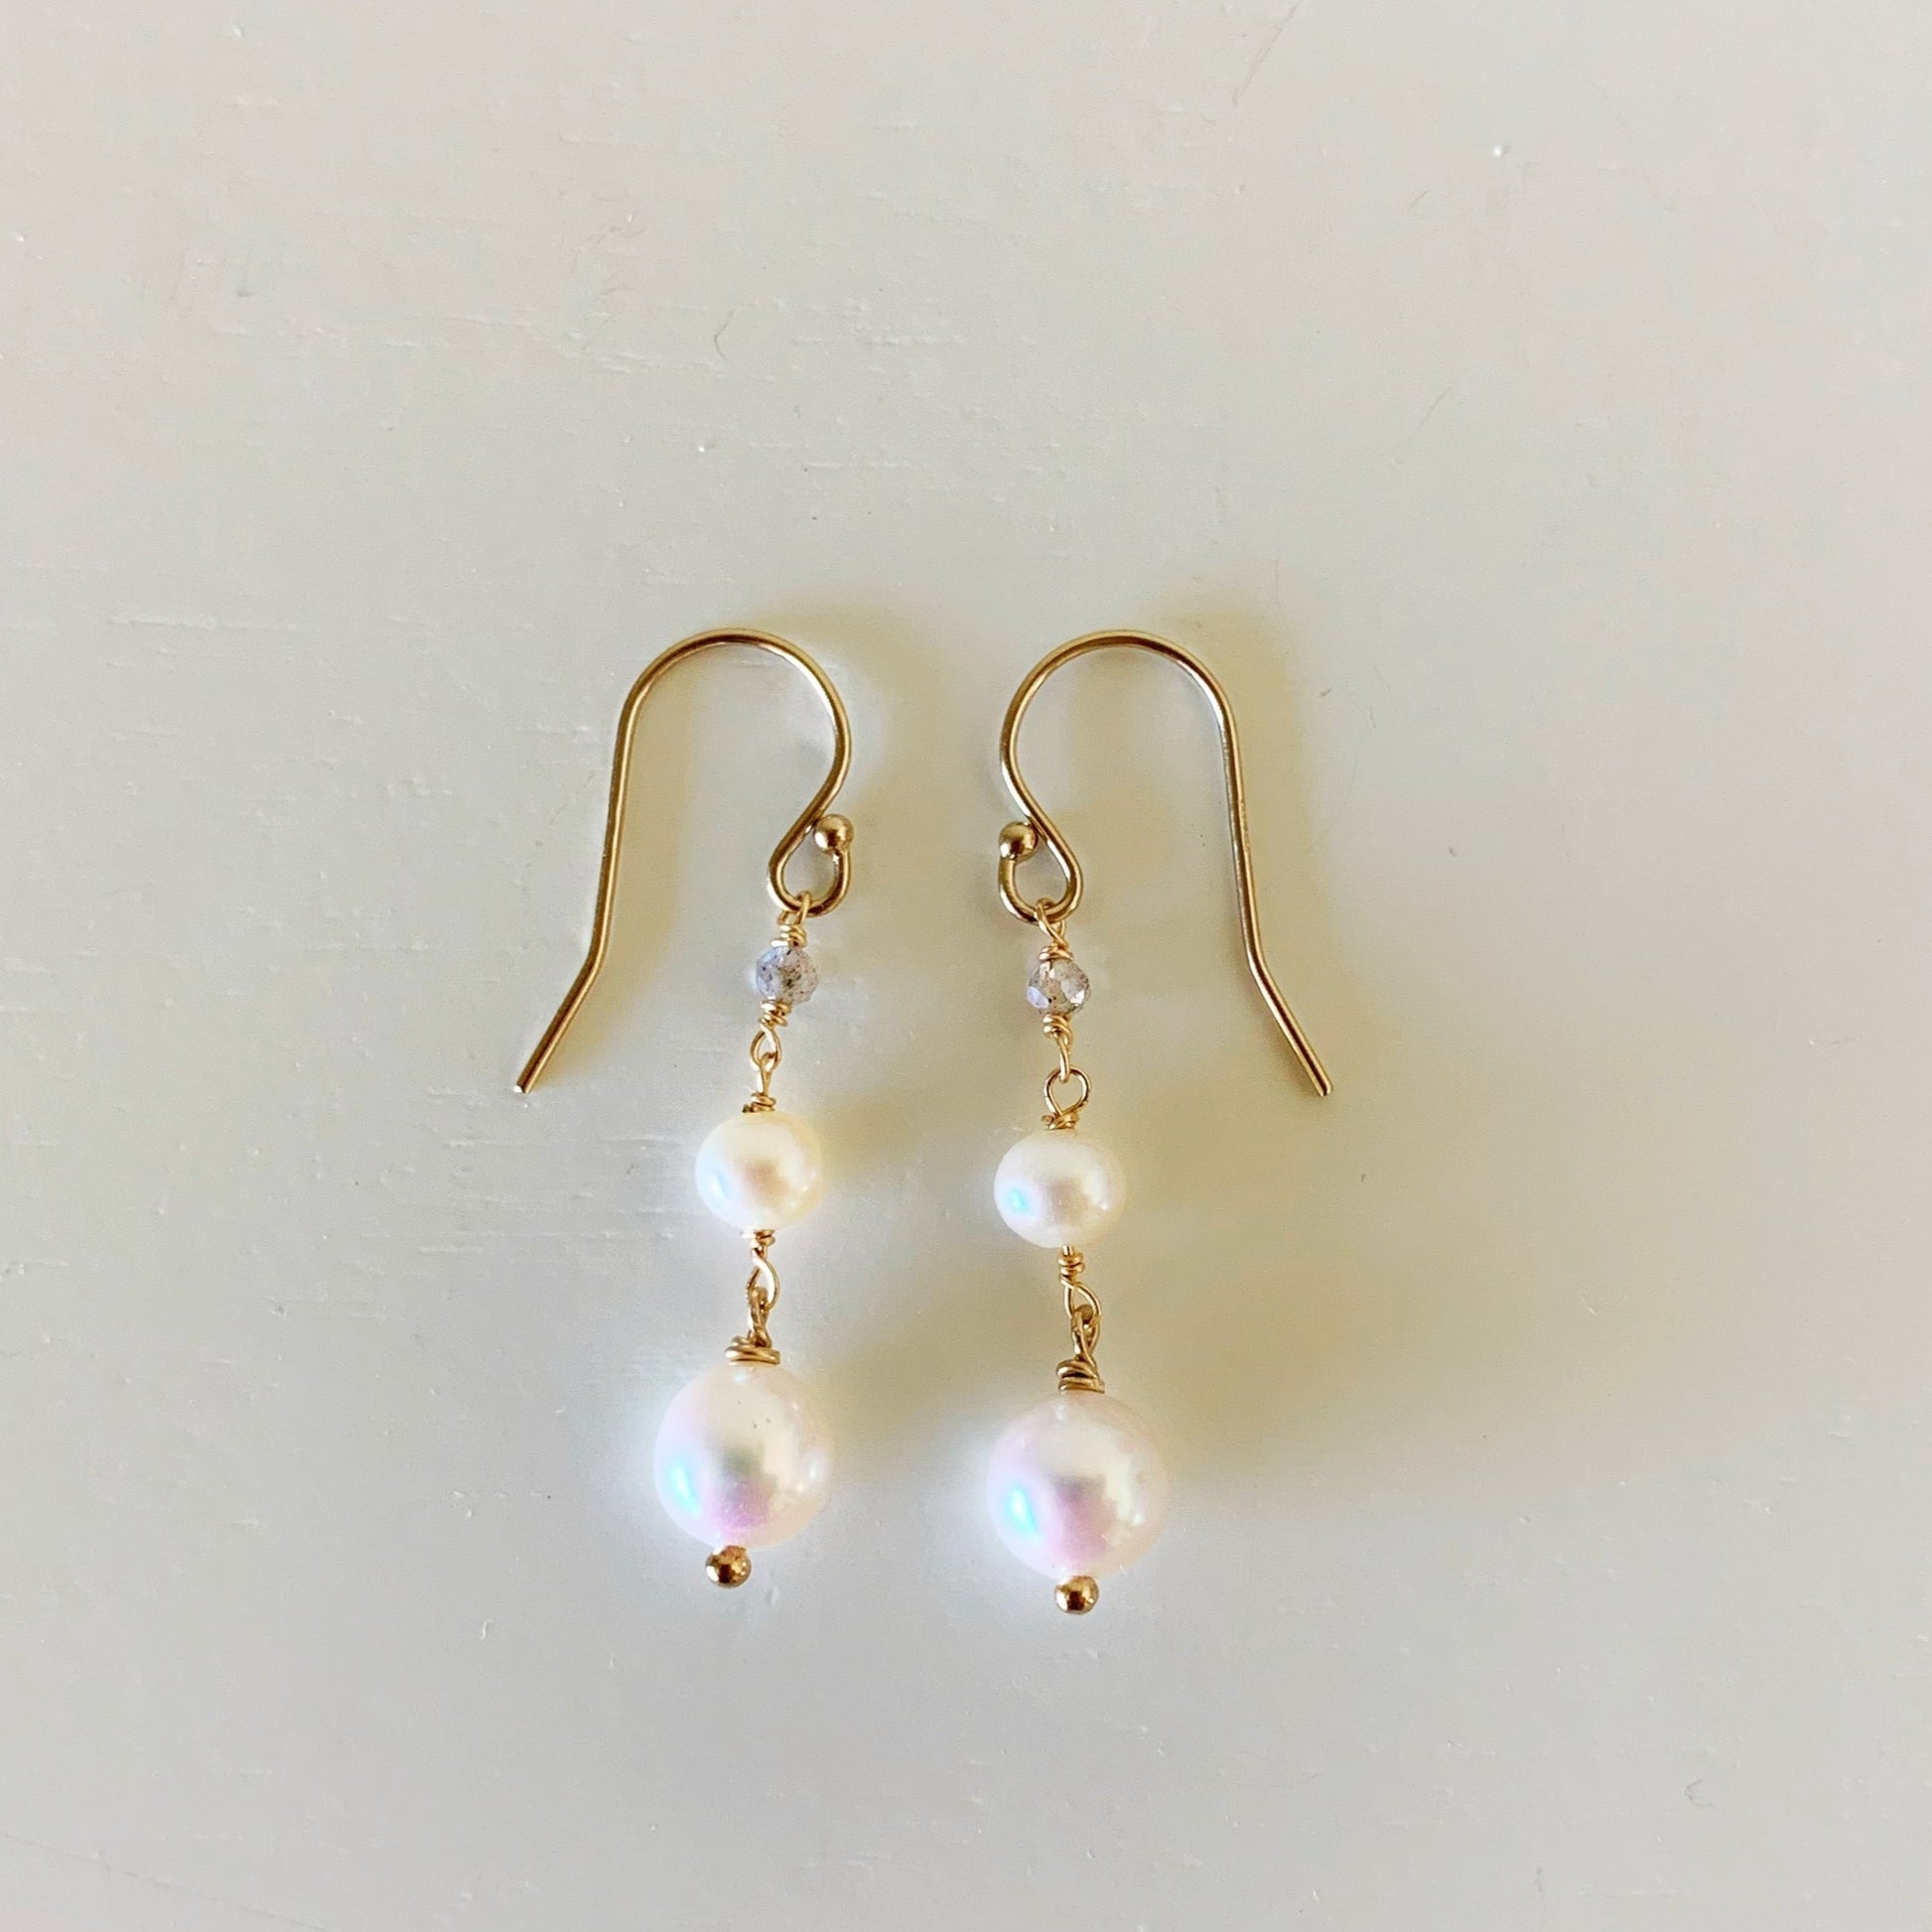 the westport earrings by mermaids and madeleines are a simple dangling style with freshwater pearls graduating to a small microfaceted labradorite bead all hanging from 14k gold filled earring findings. this pair of earrings is photographed flat on a white surface